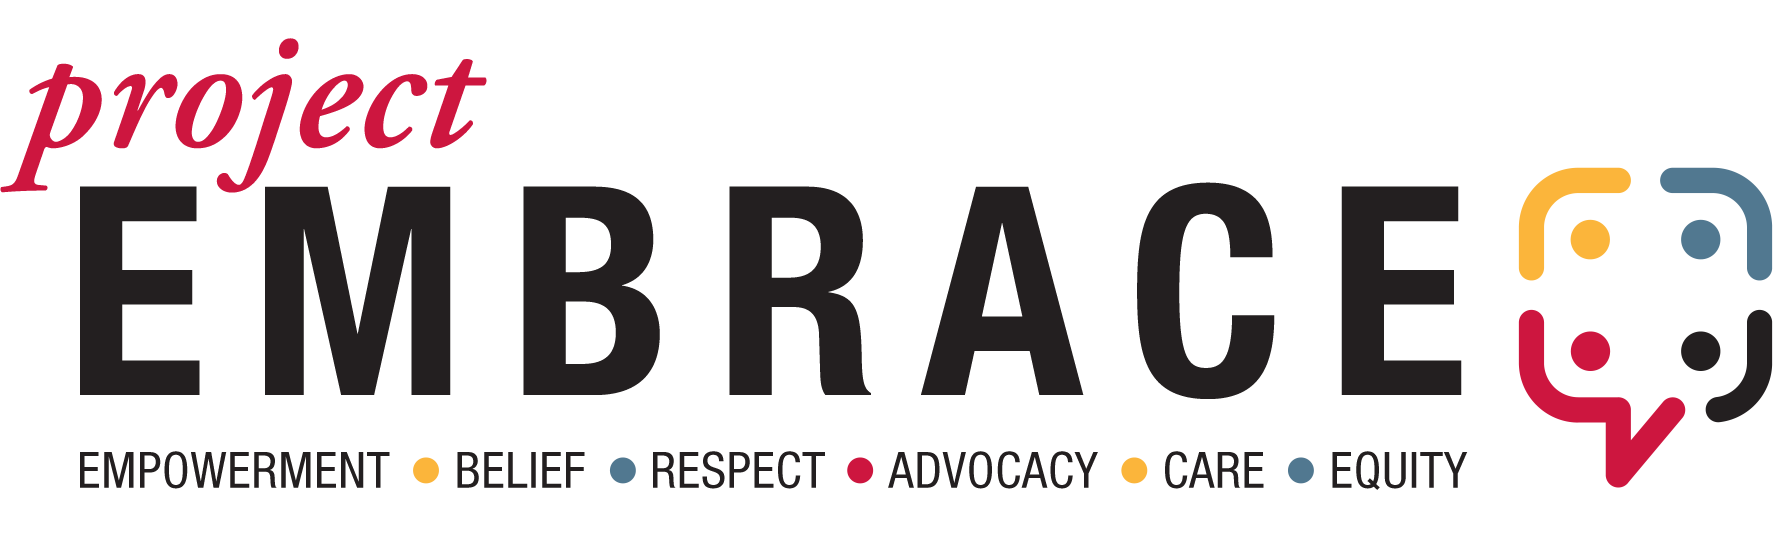 Project Embrace - Empowerment, Belief, Respect, Advocacy, Care, Equity